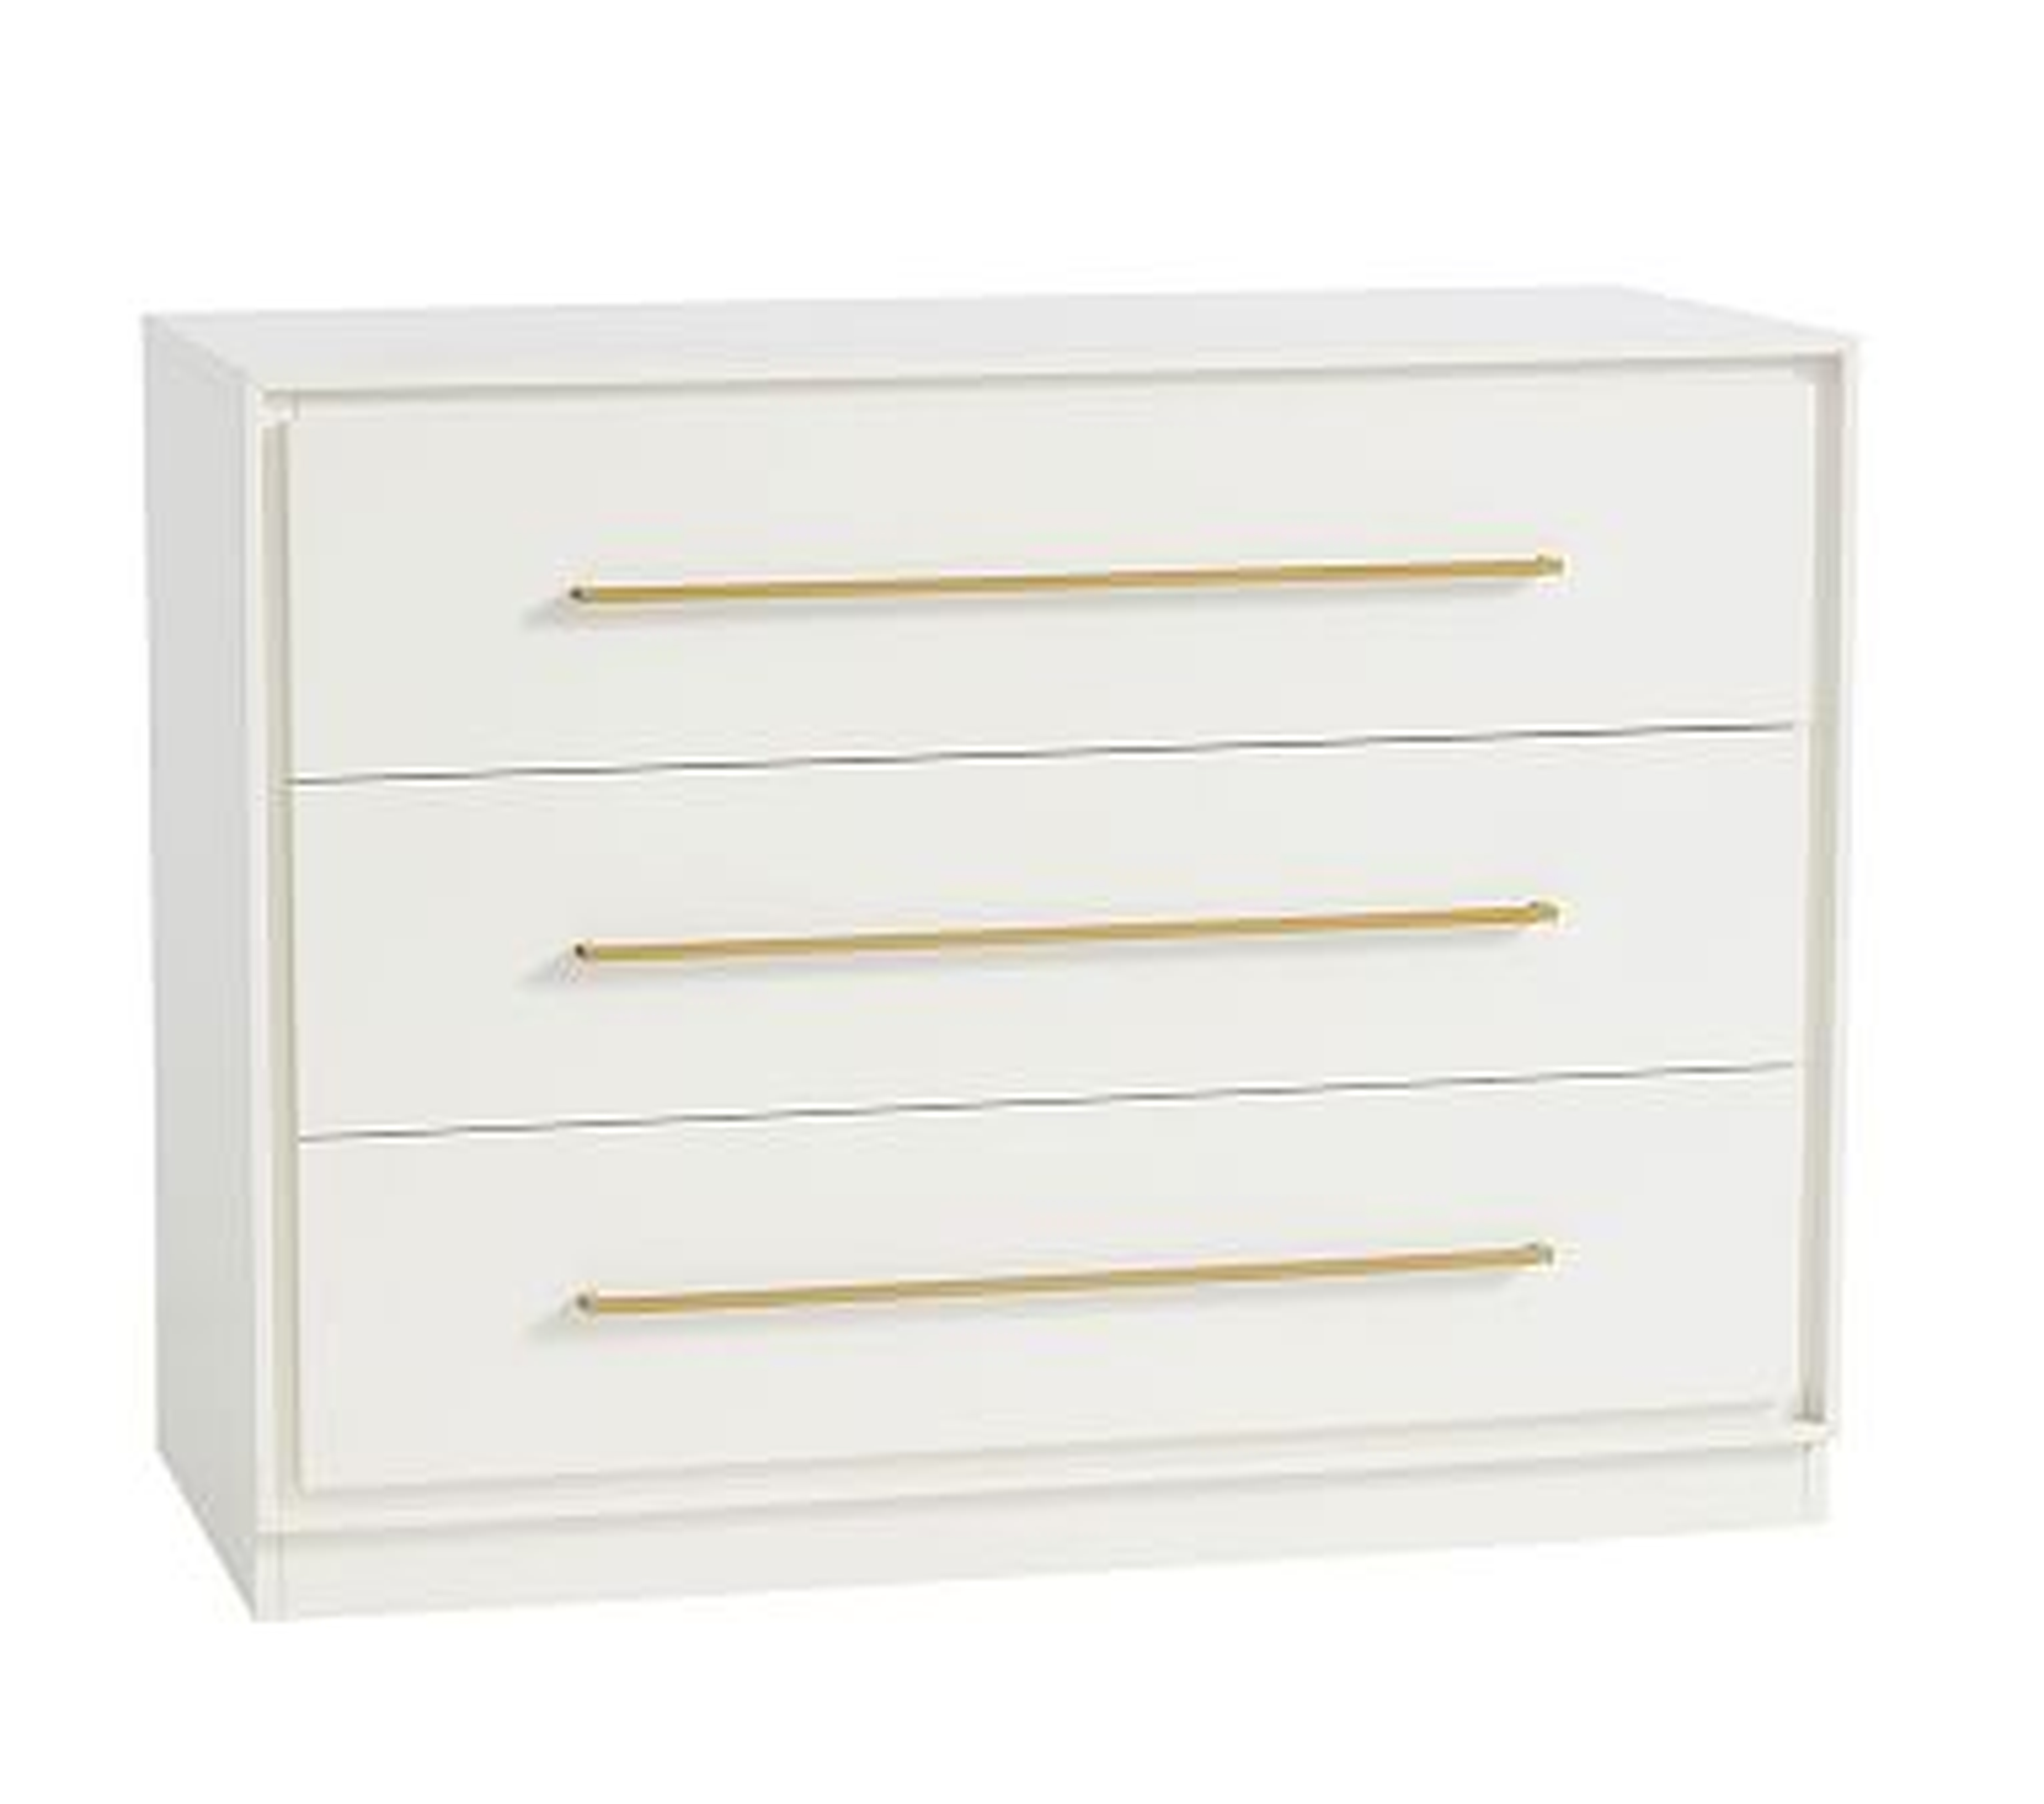 Art Deco Dresser, Simply White, Unlimited Flat Rate Delivery - Pottery Barn Kids